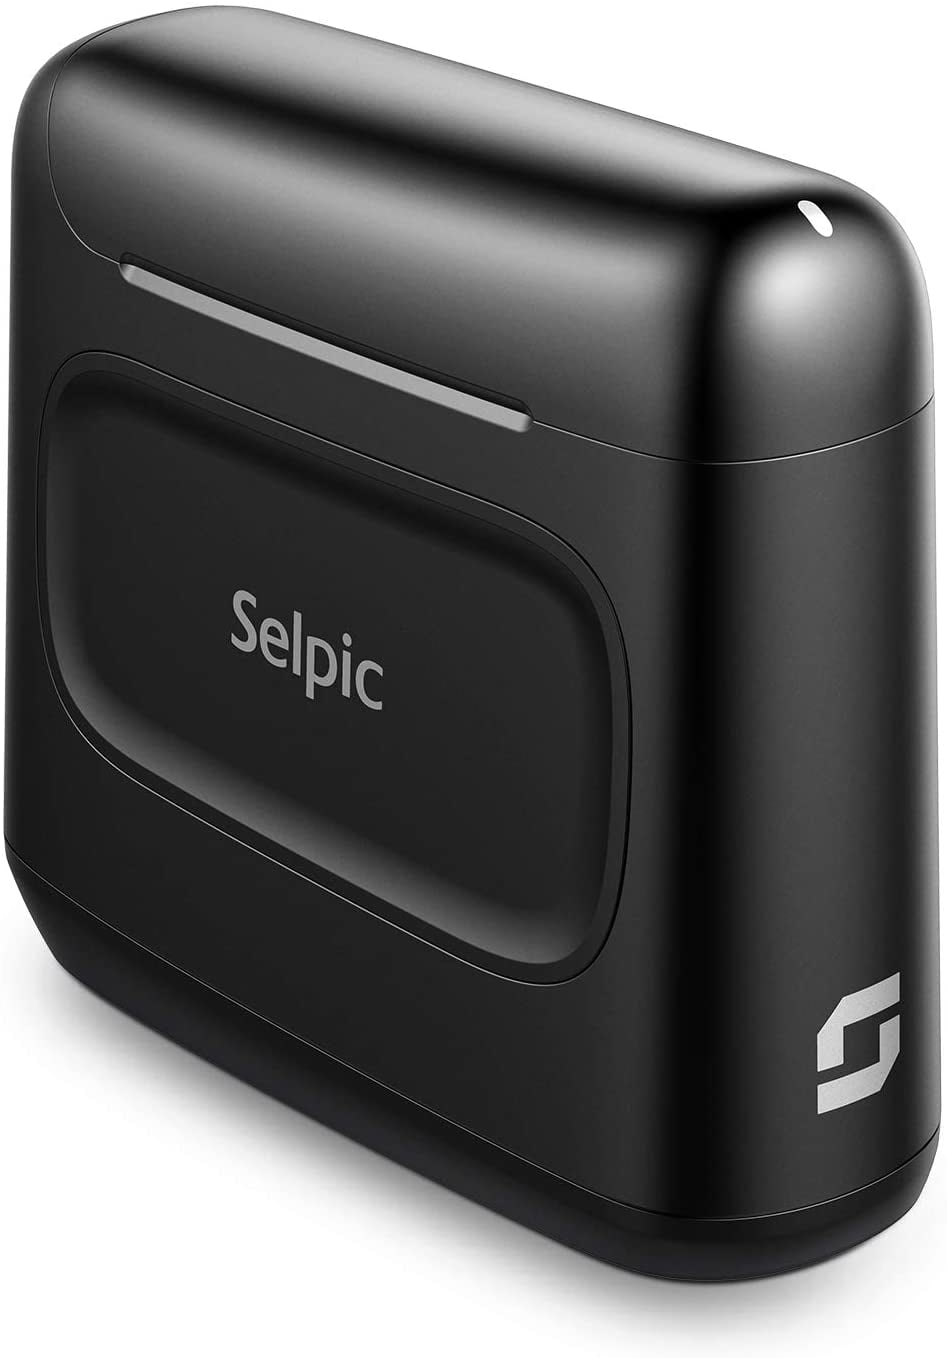 for Industrial Label Maker Selpic Handy Printer S1 Quick-Drying Ink Cartridge 40ml Black